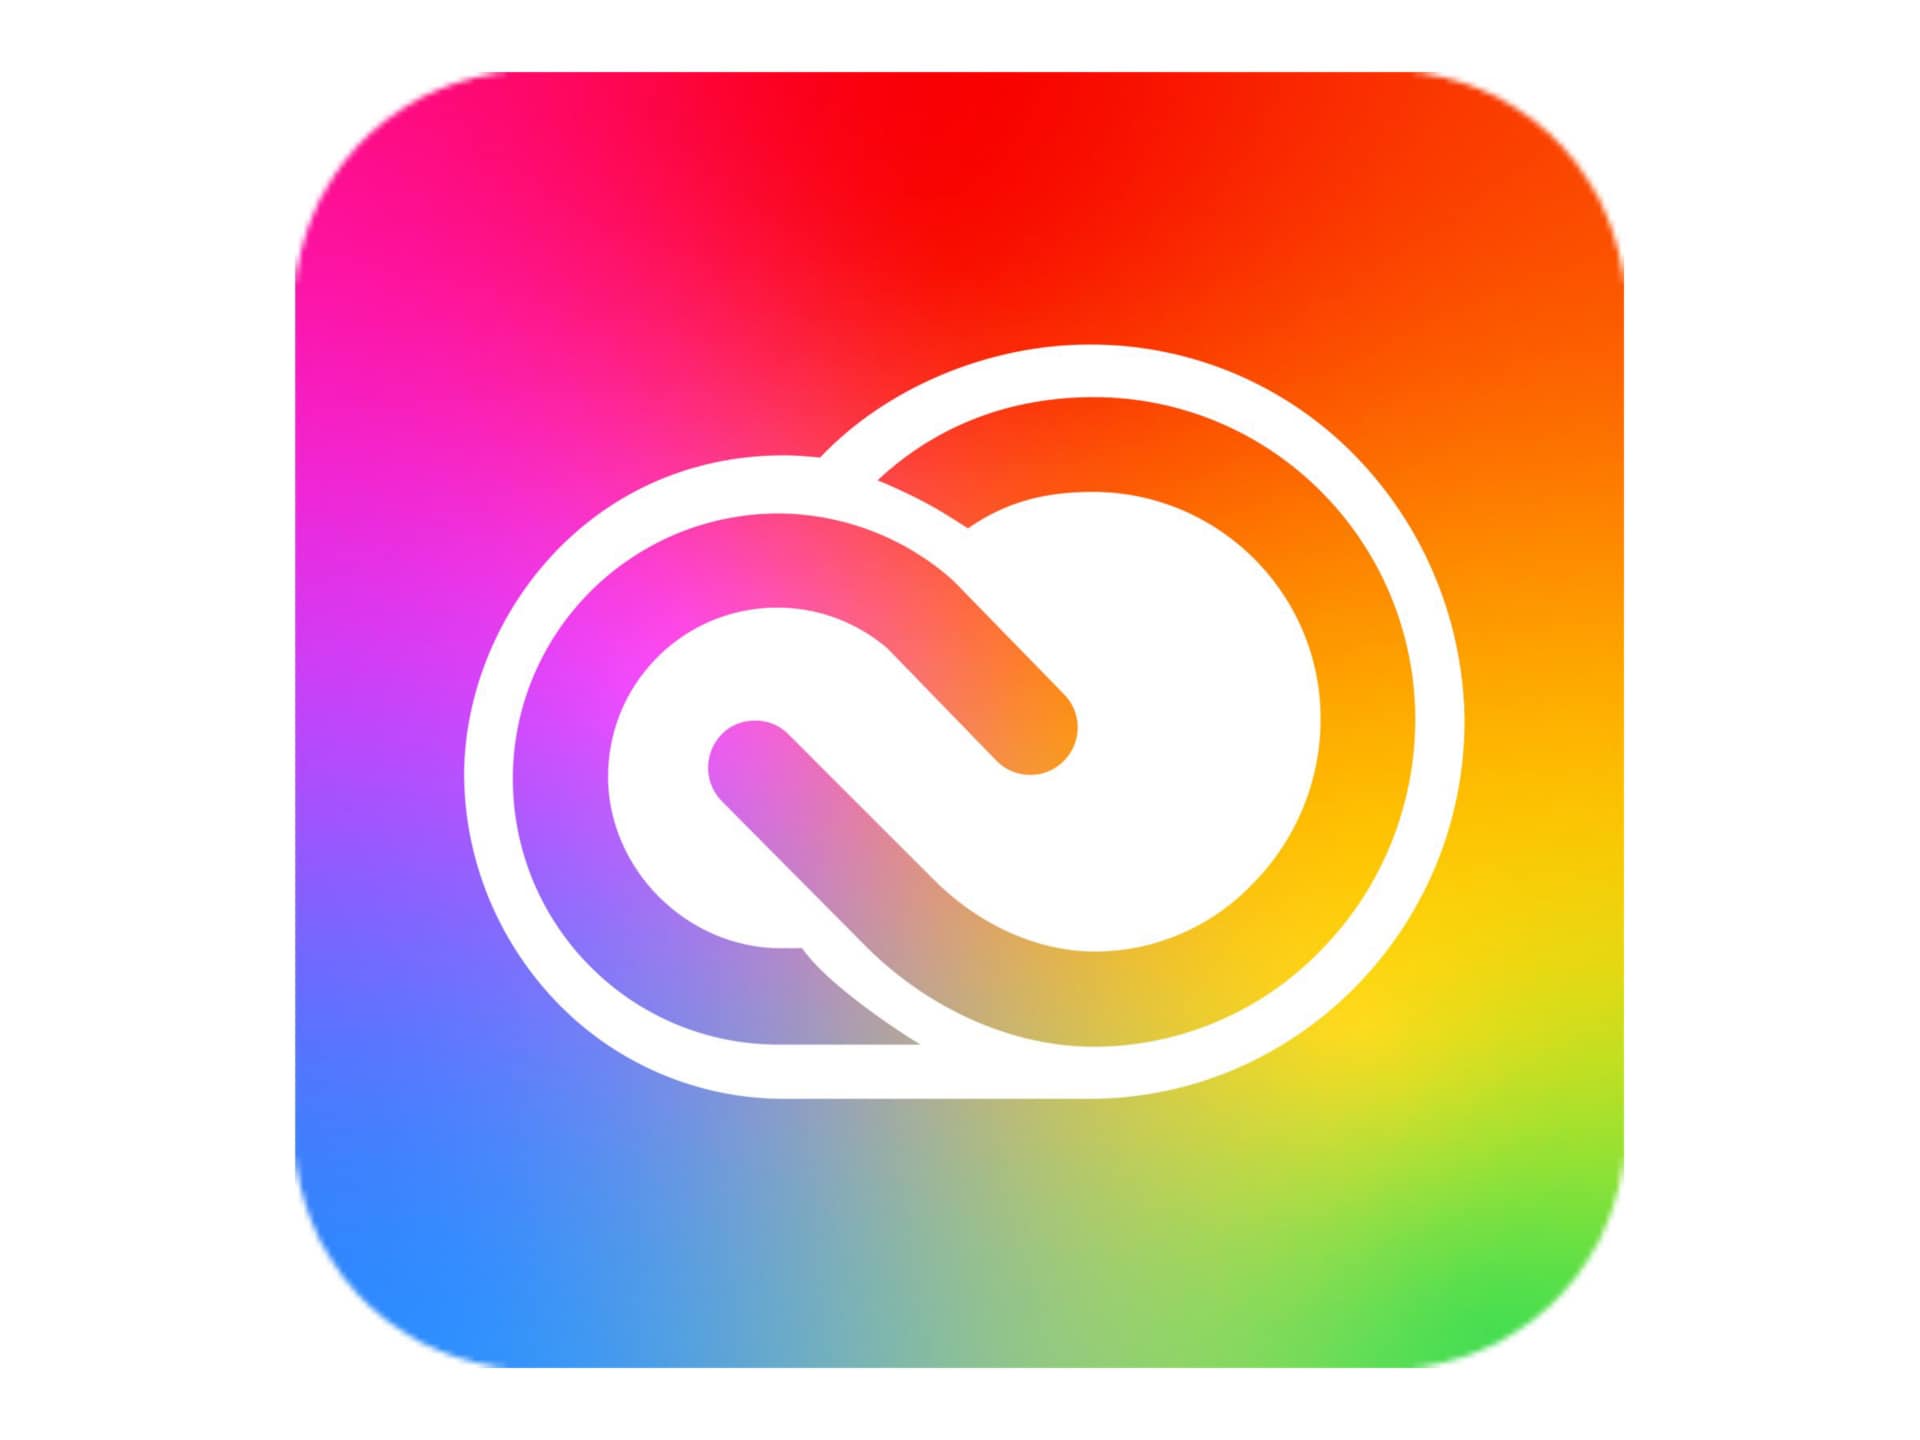 Adobe Creative Cloud for teams - Subscription New (3 years) - 10 assets, 1